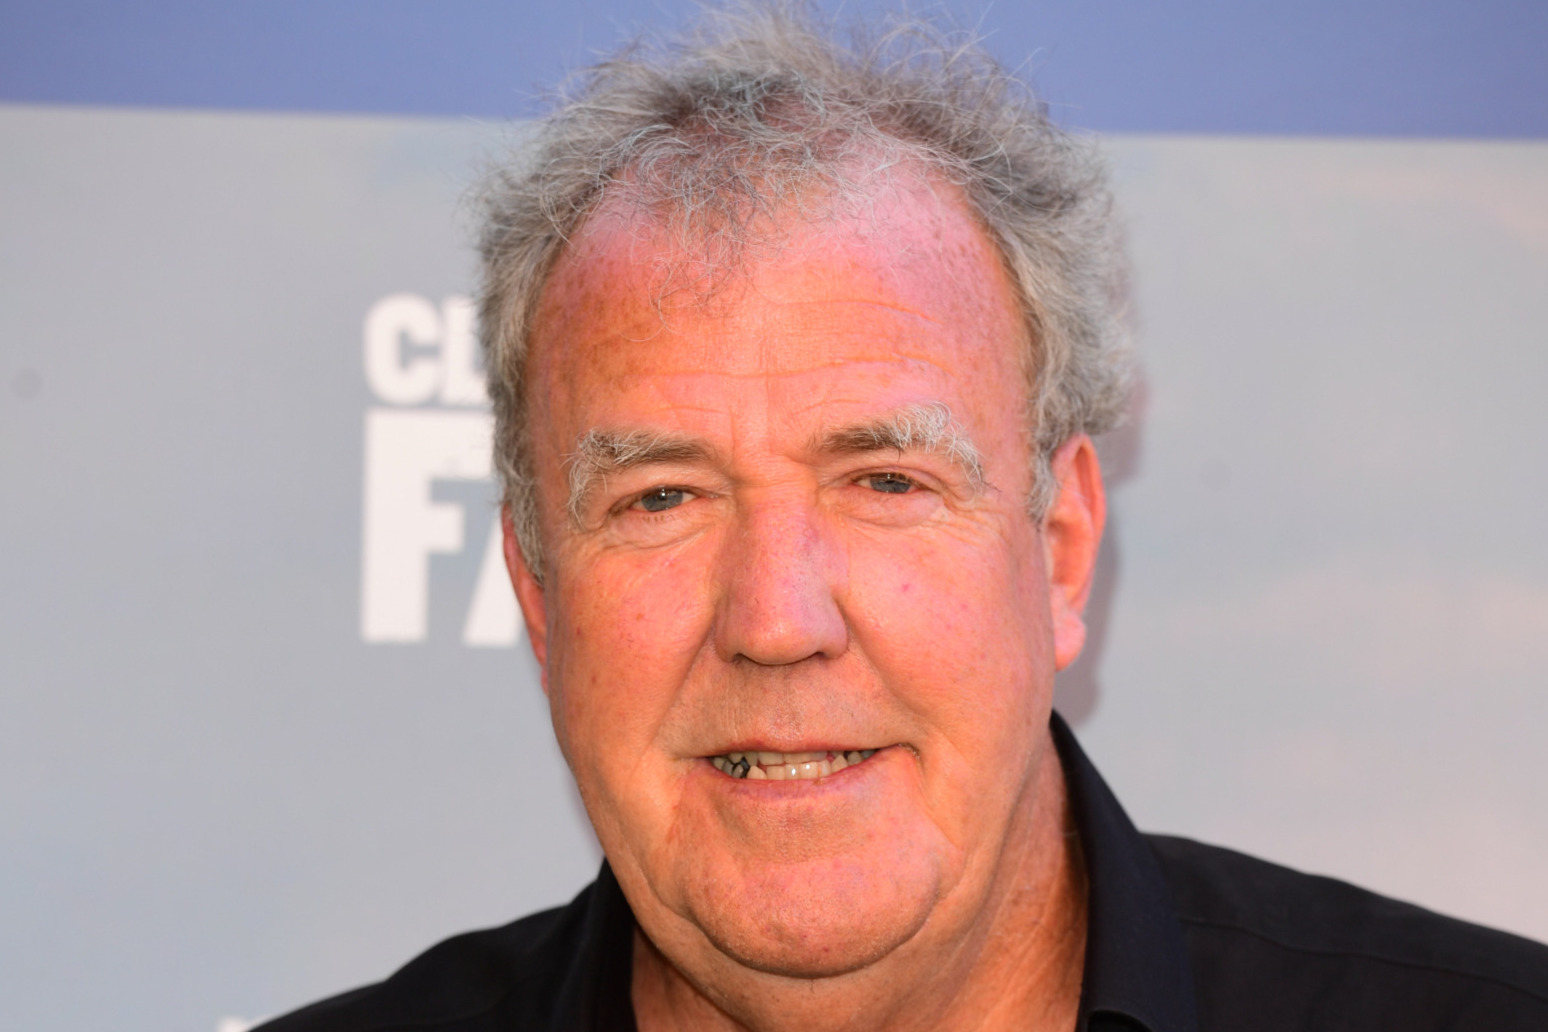 Press regulator launches probe into Jeremy Clarkson’s article about Meghan 